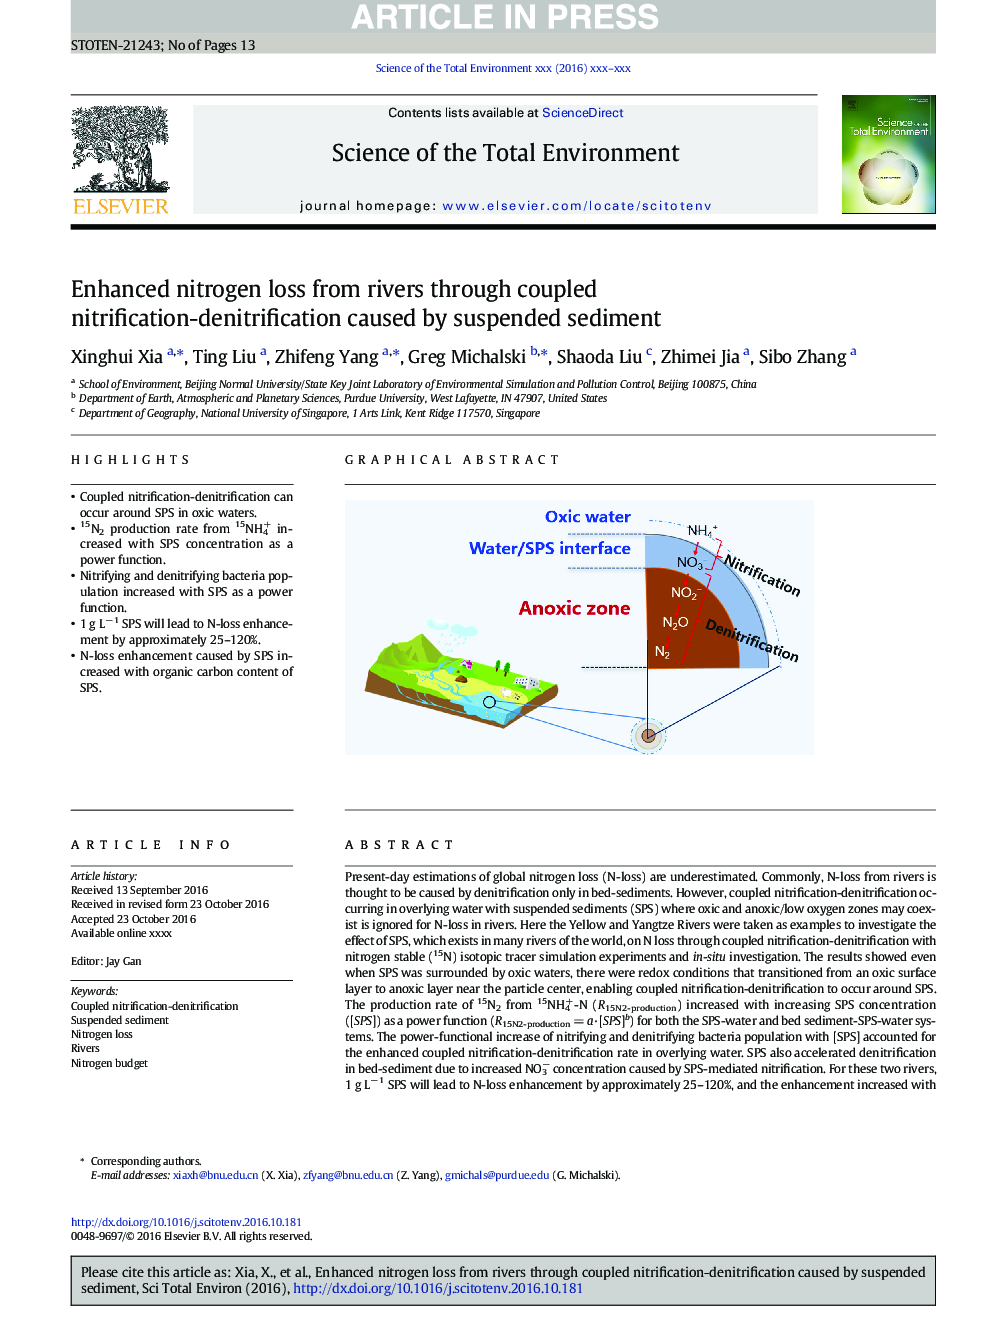 Enhanced nitrogen loss from rivers through coupled nitrification-denitrification caused by suspended sediment